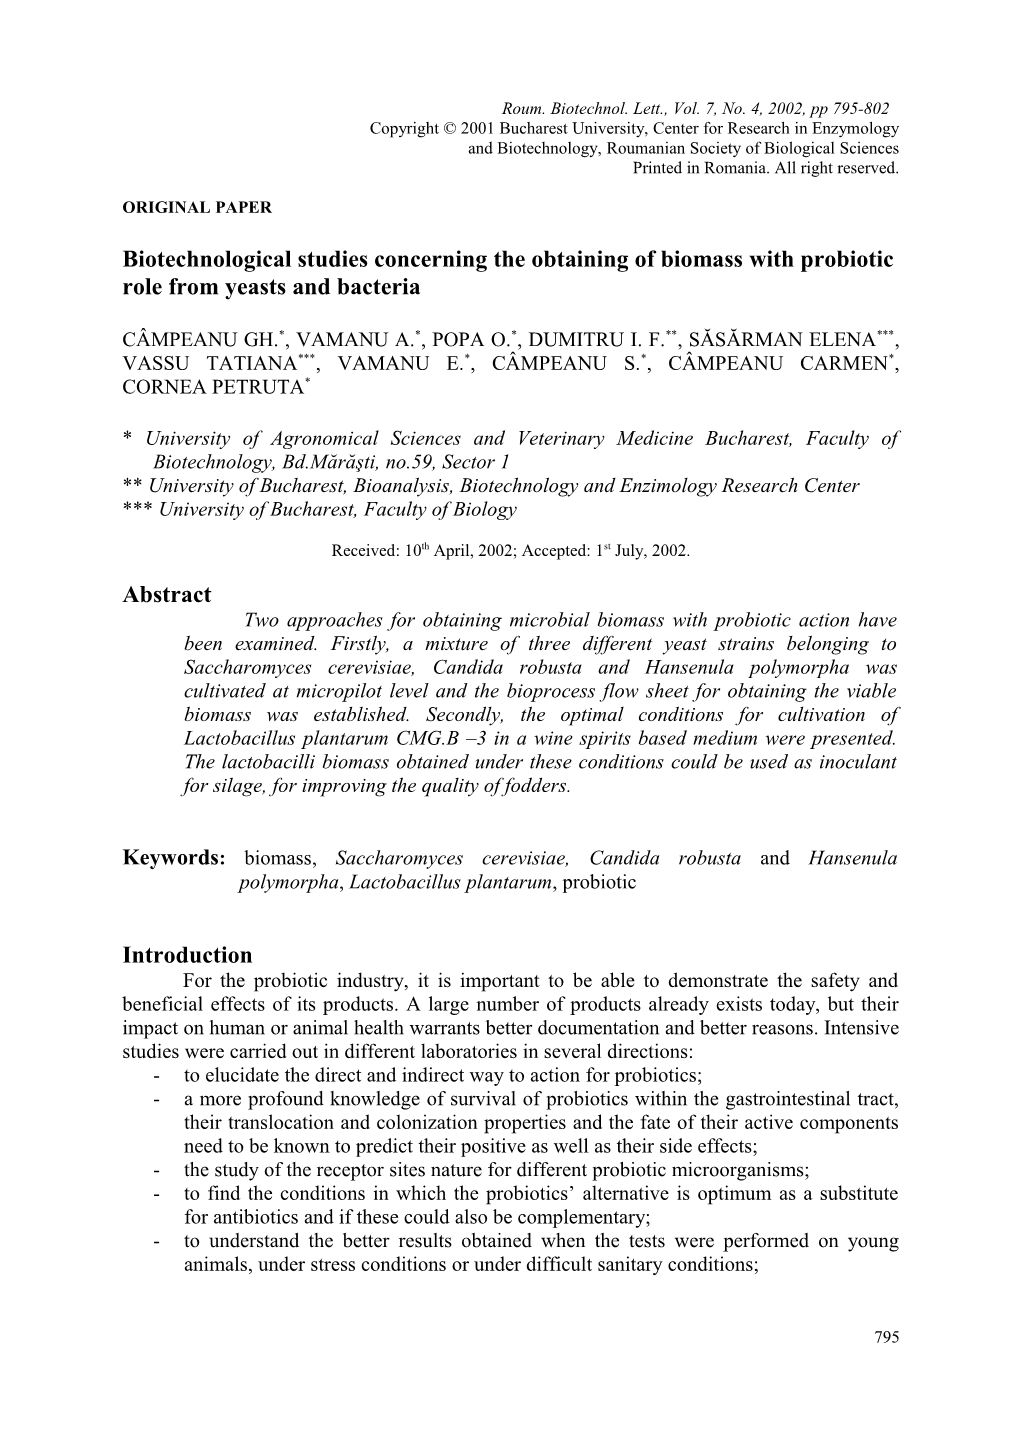 Biotechnological Studies Concerning the Obtaining of Biomass from Yeasts and Bacterium